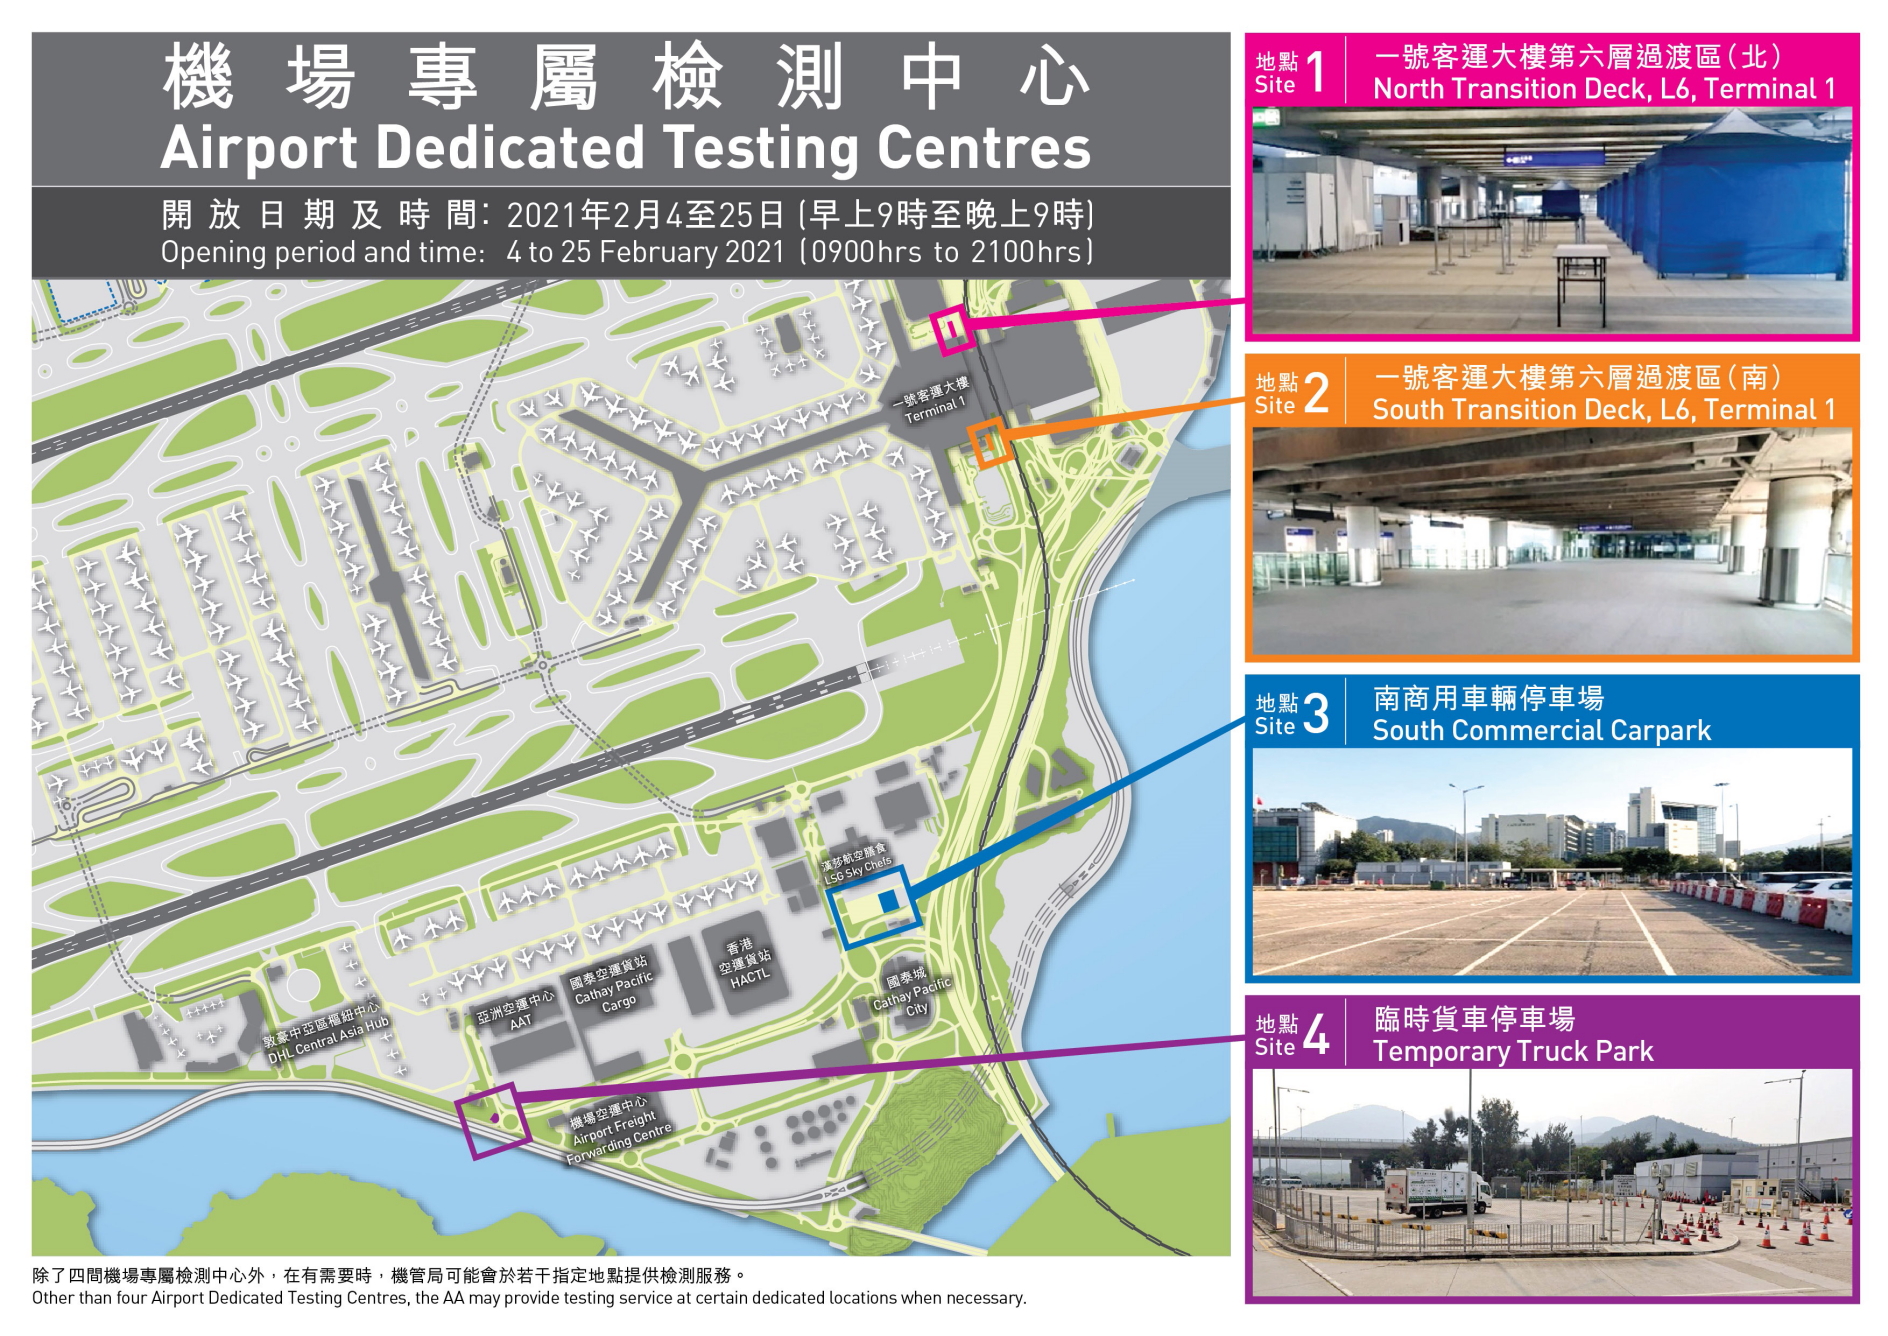 The four COVID19 testing centres at HKIA are being be set up at North and South Transition Deck at Terminal 1, South Commercial Carpark, and Temporary Truck Park at the airport. They will operate from 4 to 25 February 2021. Click to enlarge.